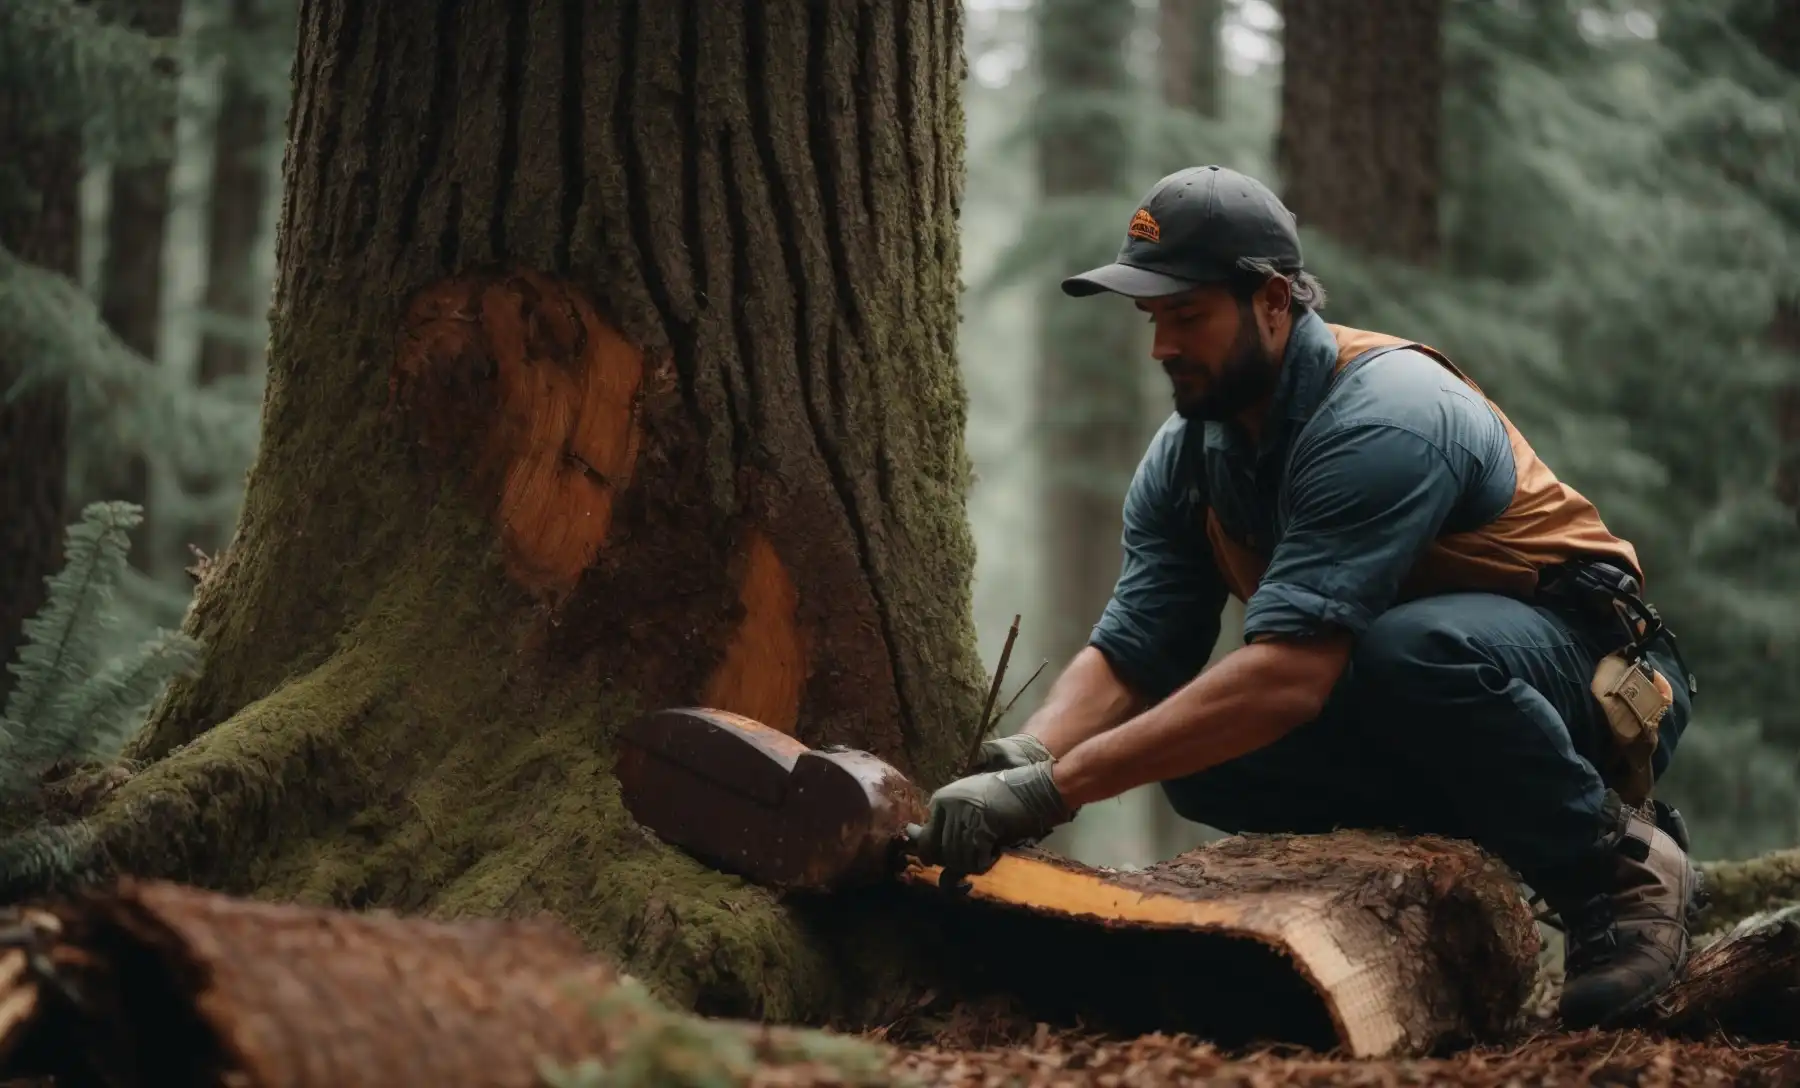 How to Cut down a Tree With a Chainsaw